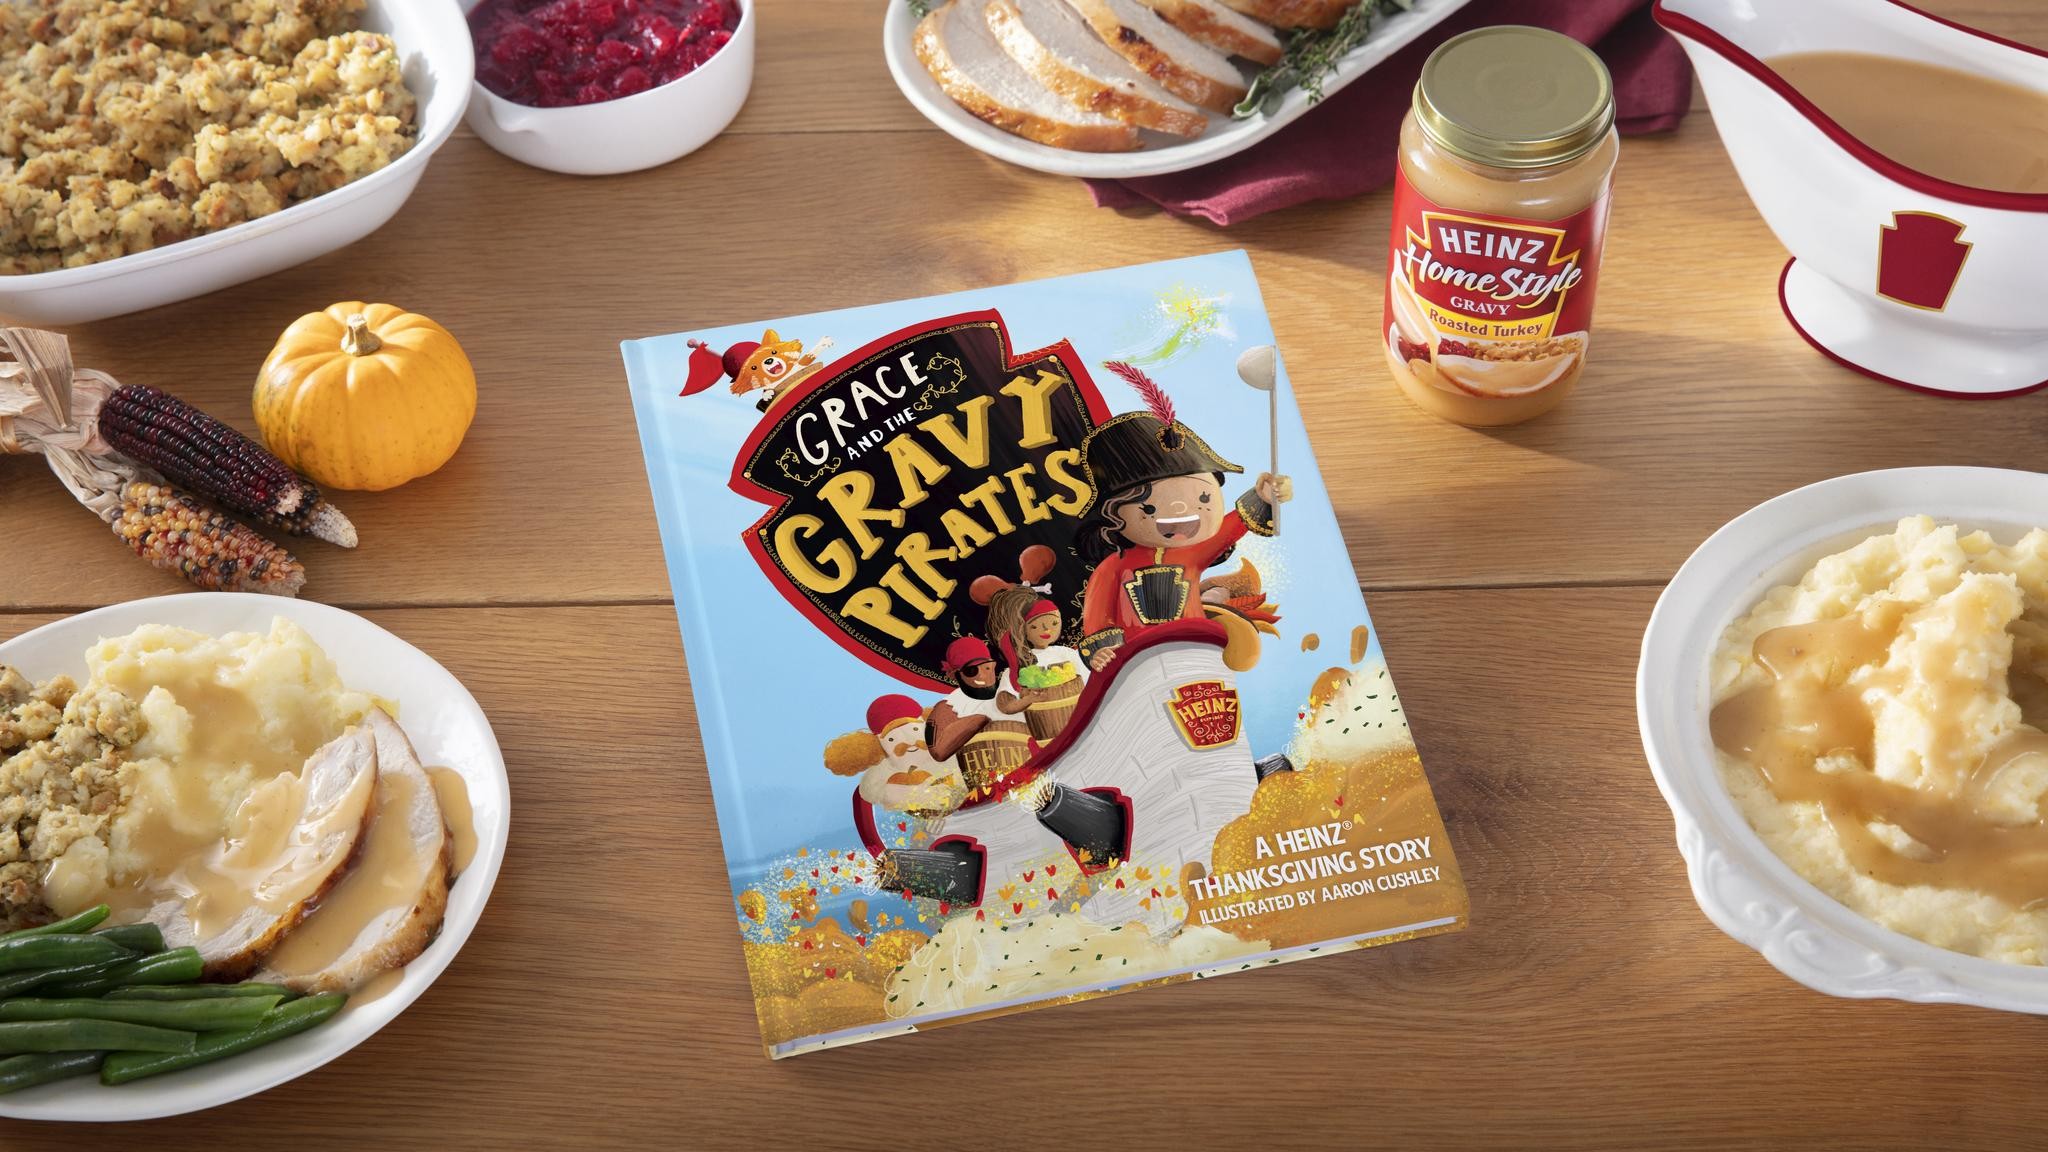 Heinz: Grace and the Gravy Pirates